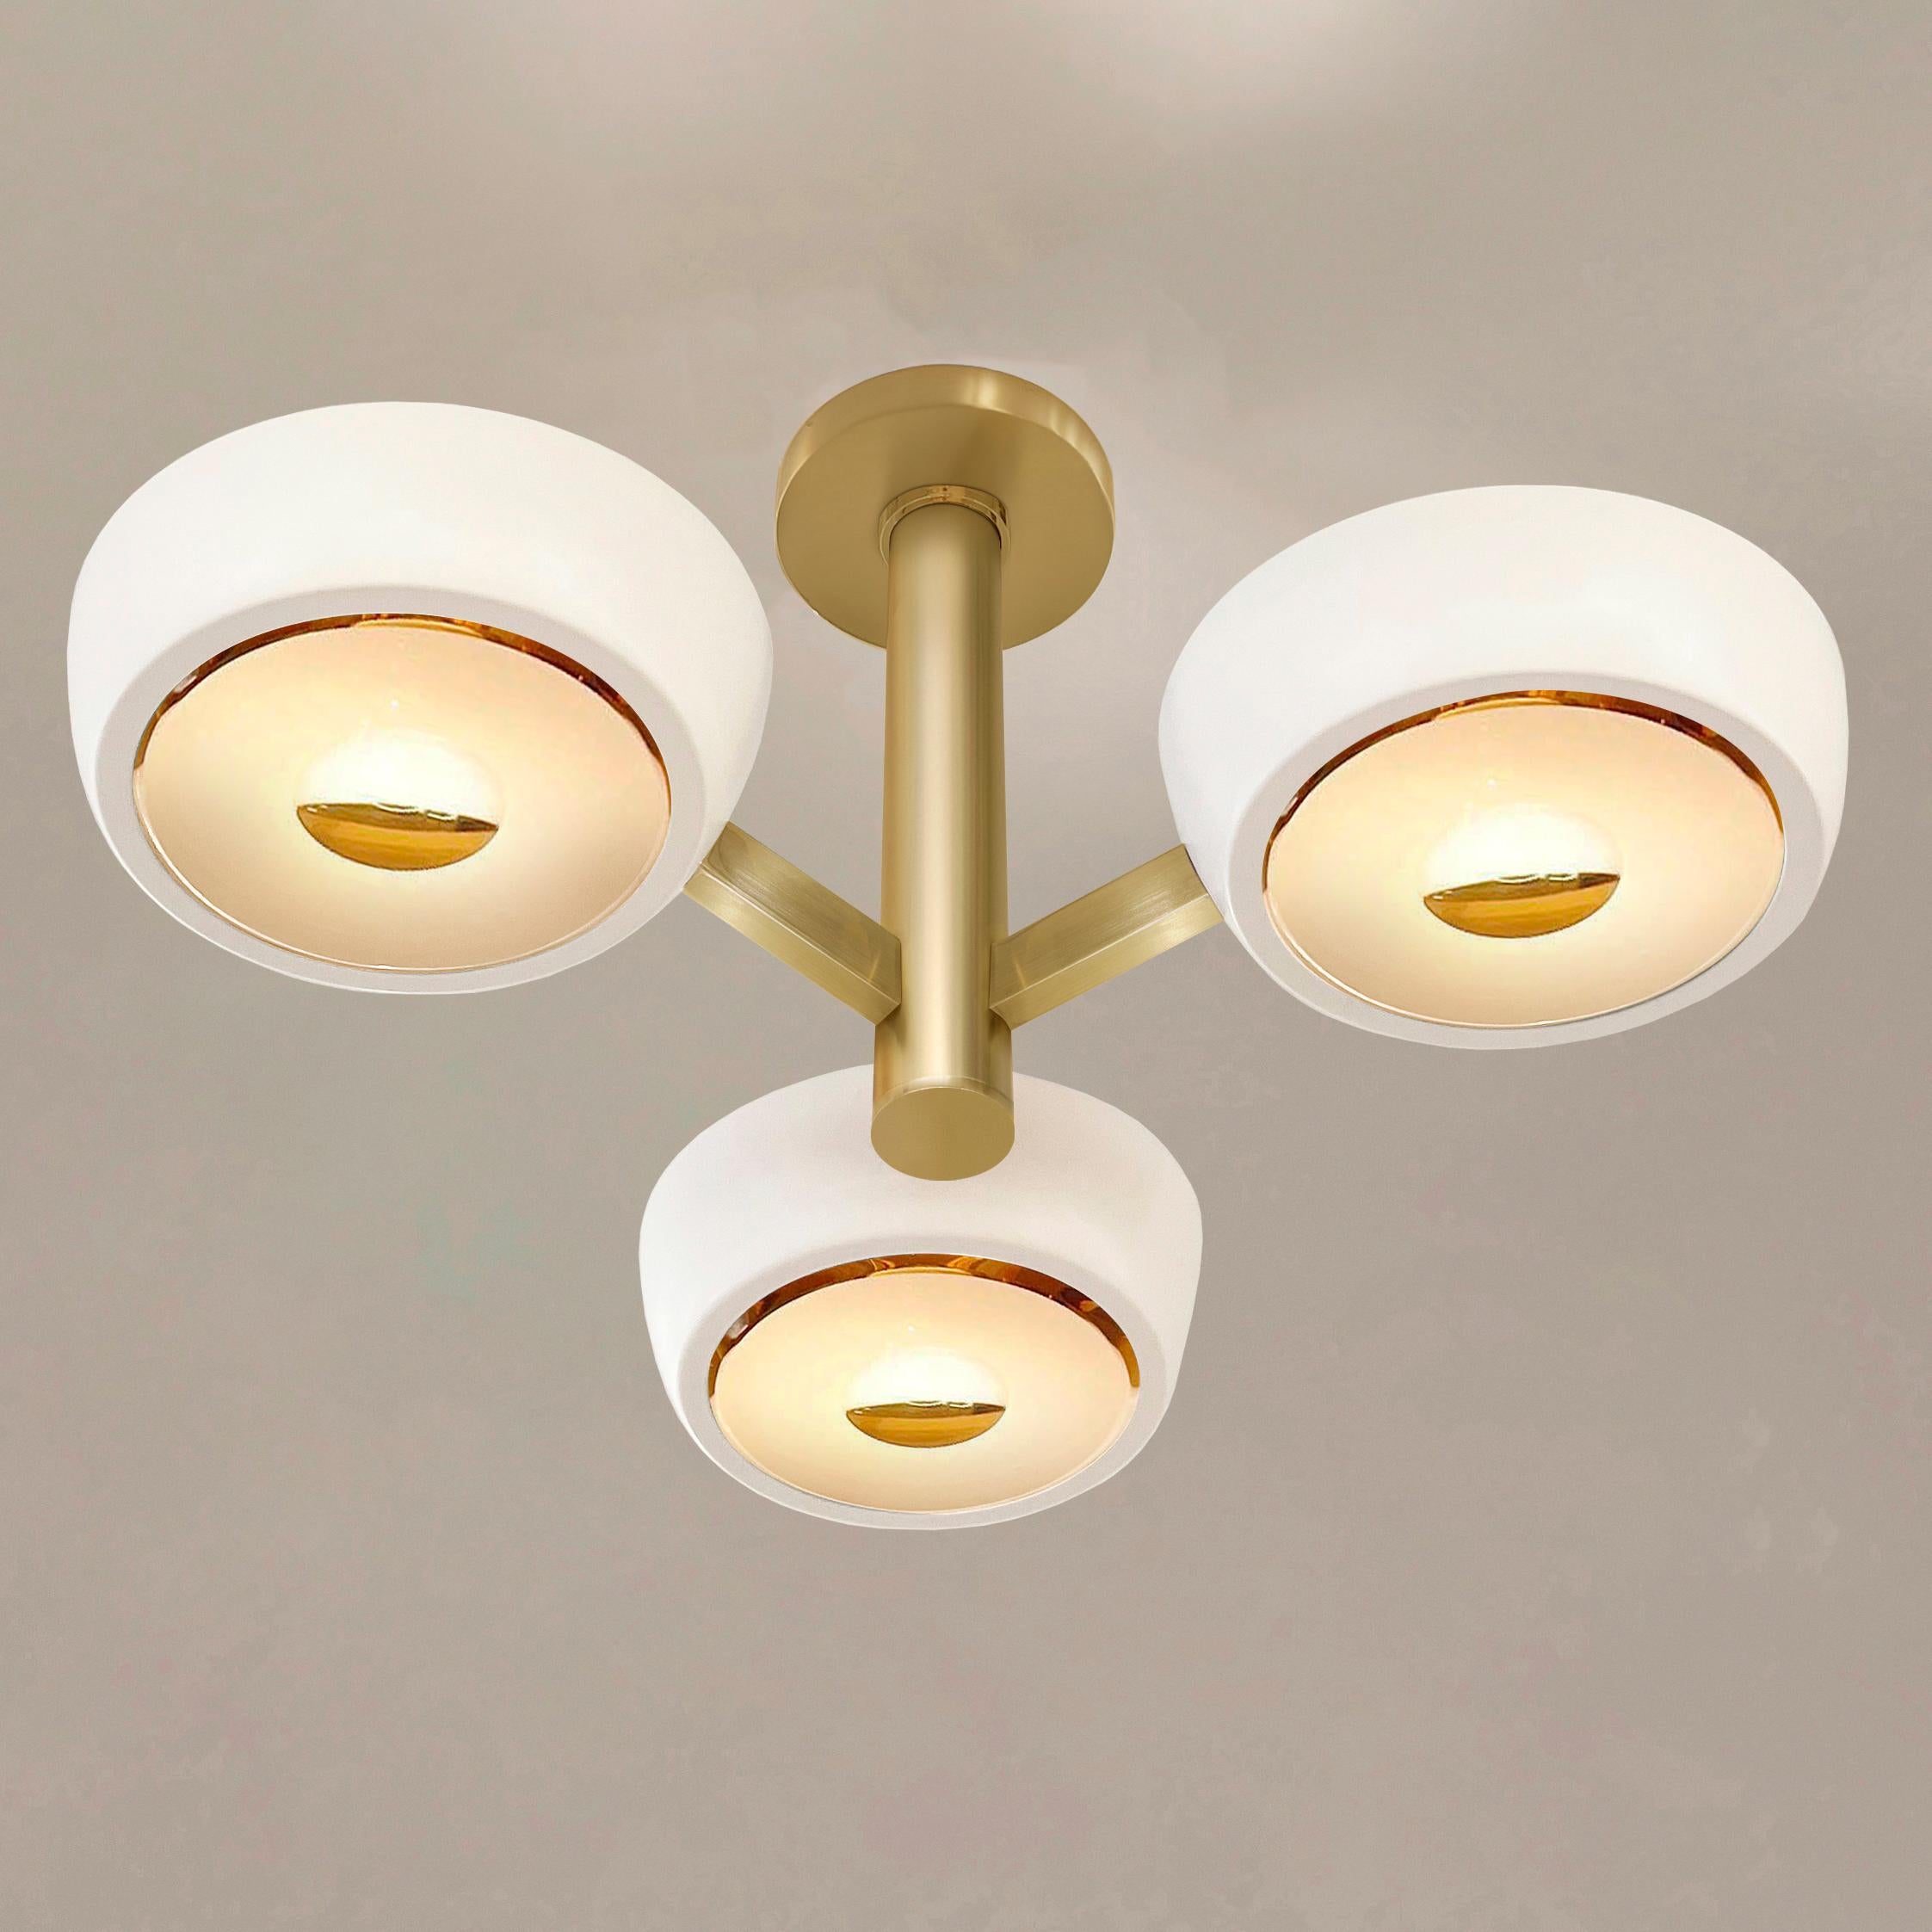 Modern Rose Piccolo Ceiling Light by Gaspare Asaro- Rose Glass and Brass Finish For Sale